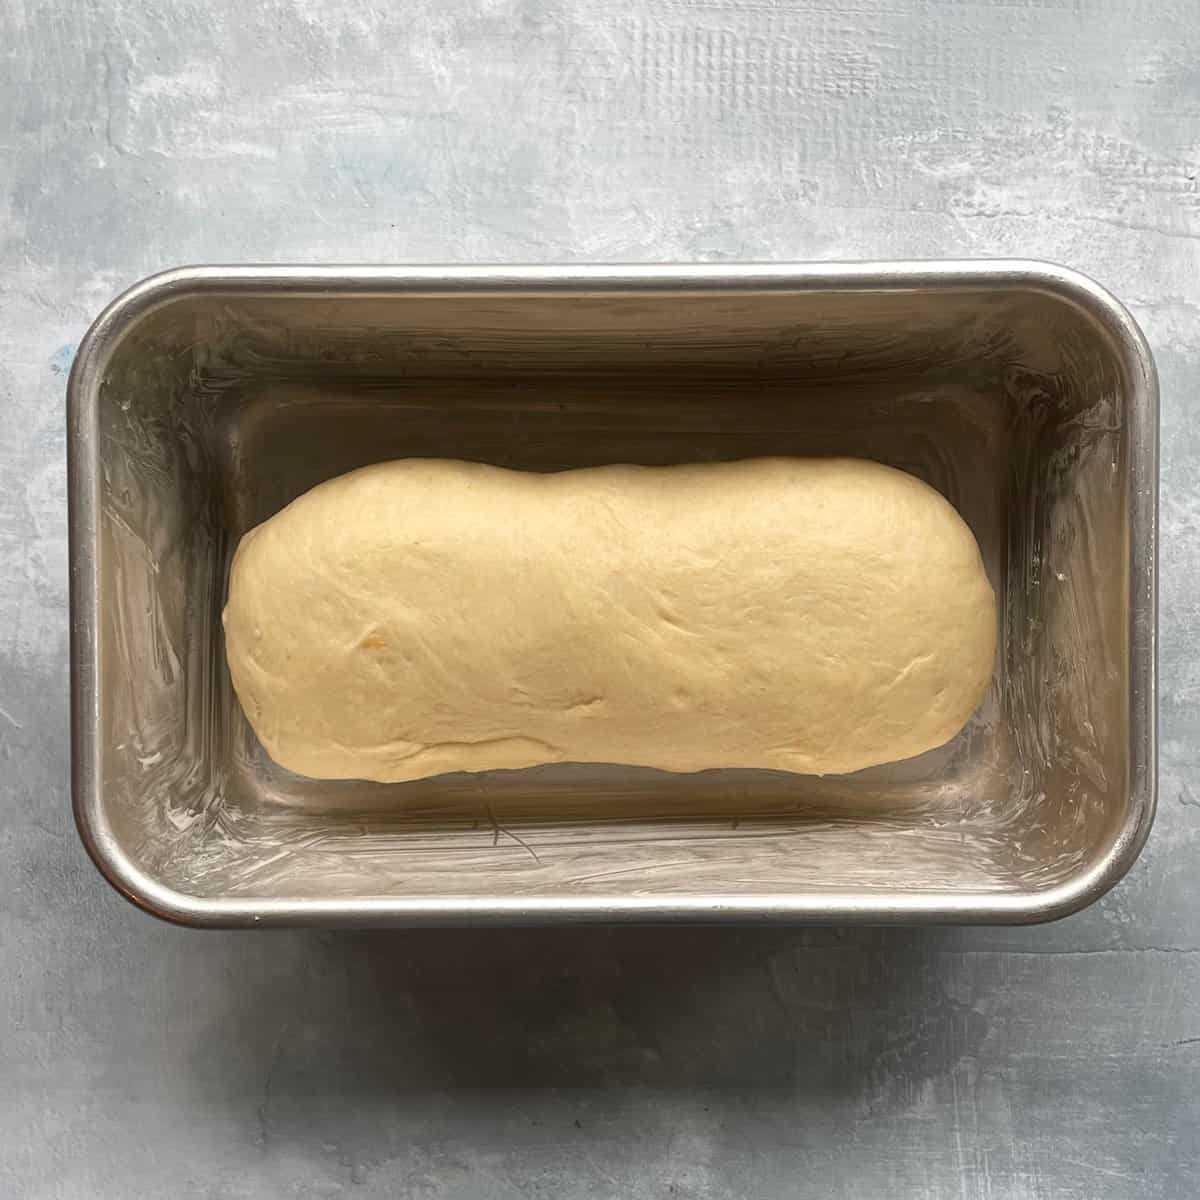 white bread in a loaf pan before rising. 